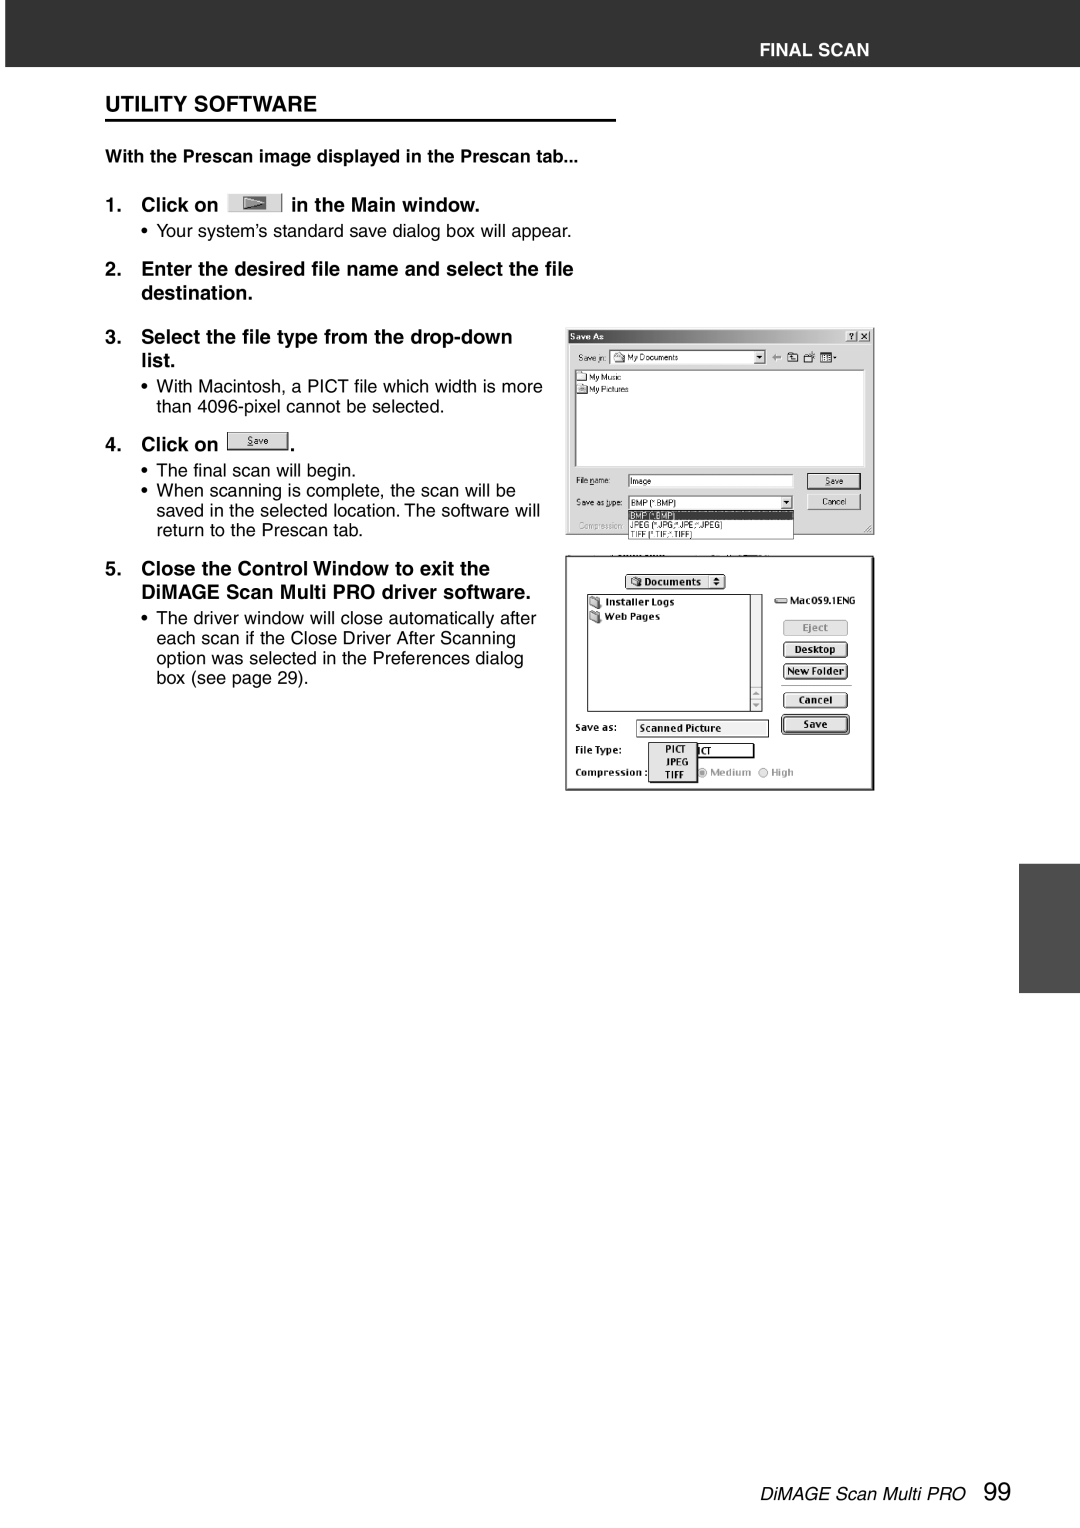 Konica Minolta Scan Multi PRO Utility Software, Click on in the Main window, Select the file type from the drop-down list 